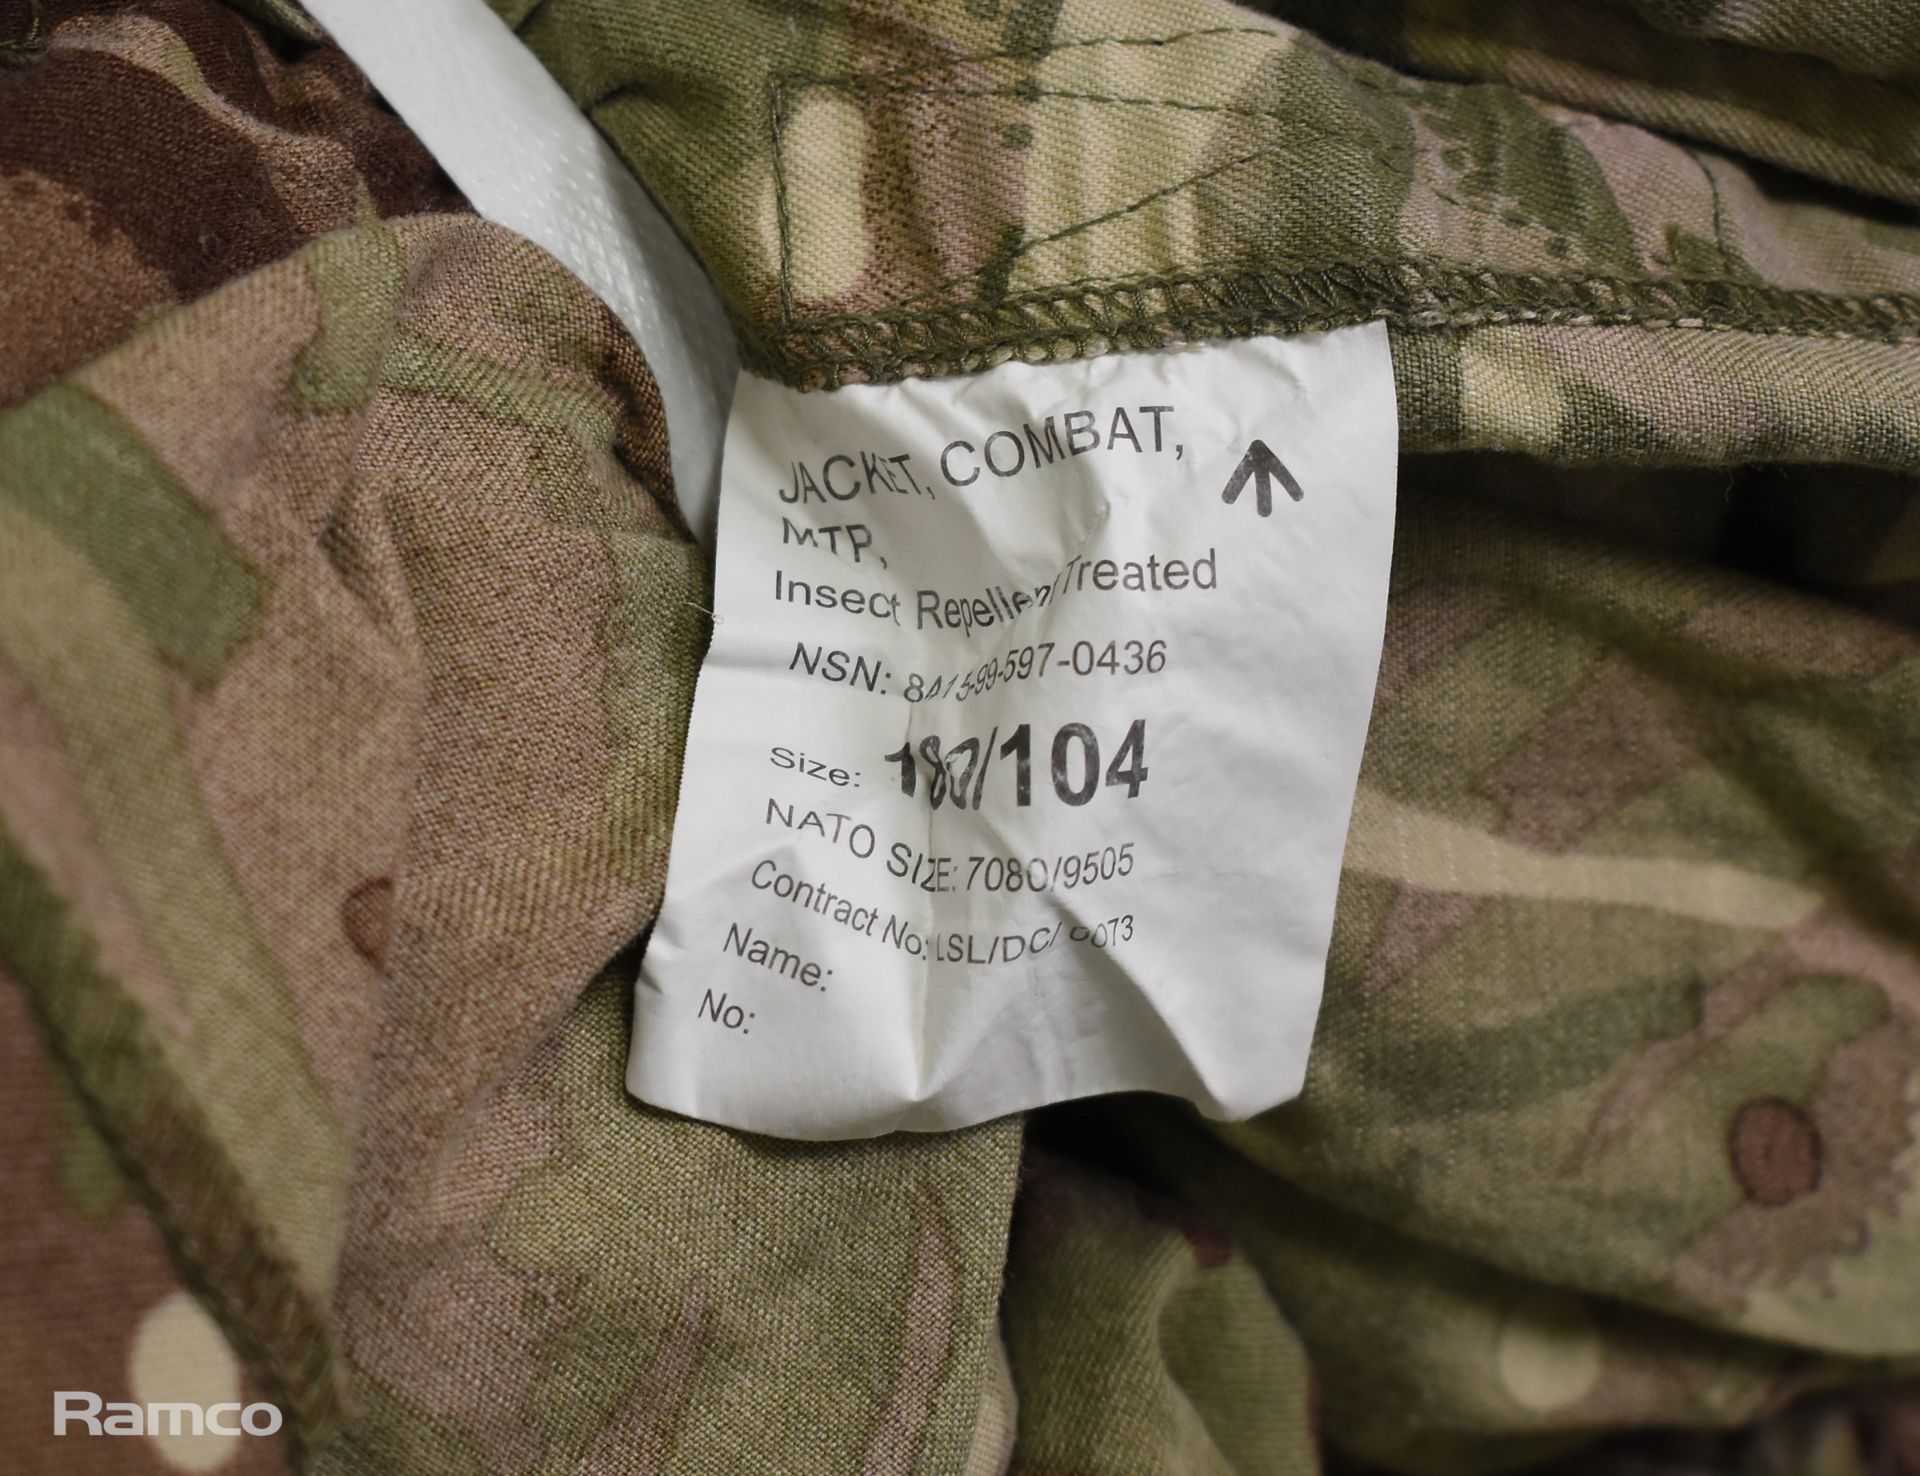 10x British Army MTP Combat jackets mixed styles - mixed grades and sizes - Image 9 of 12